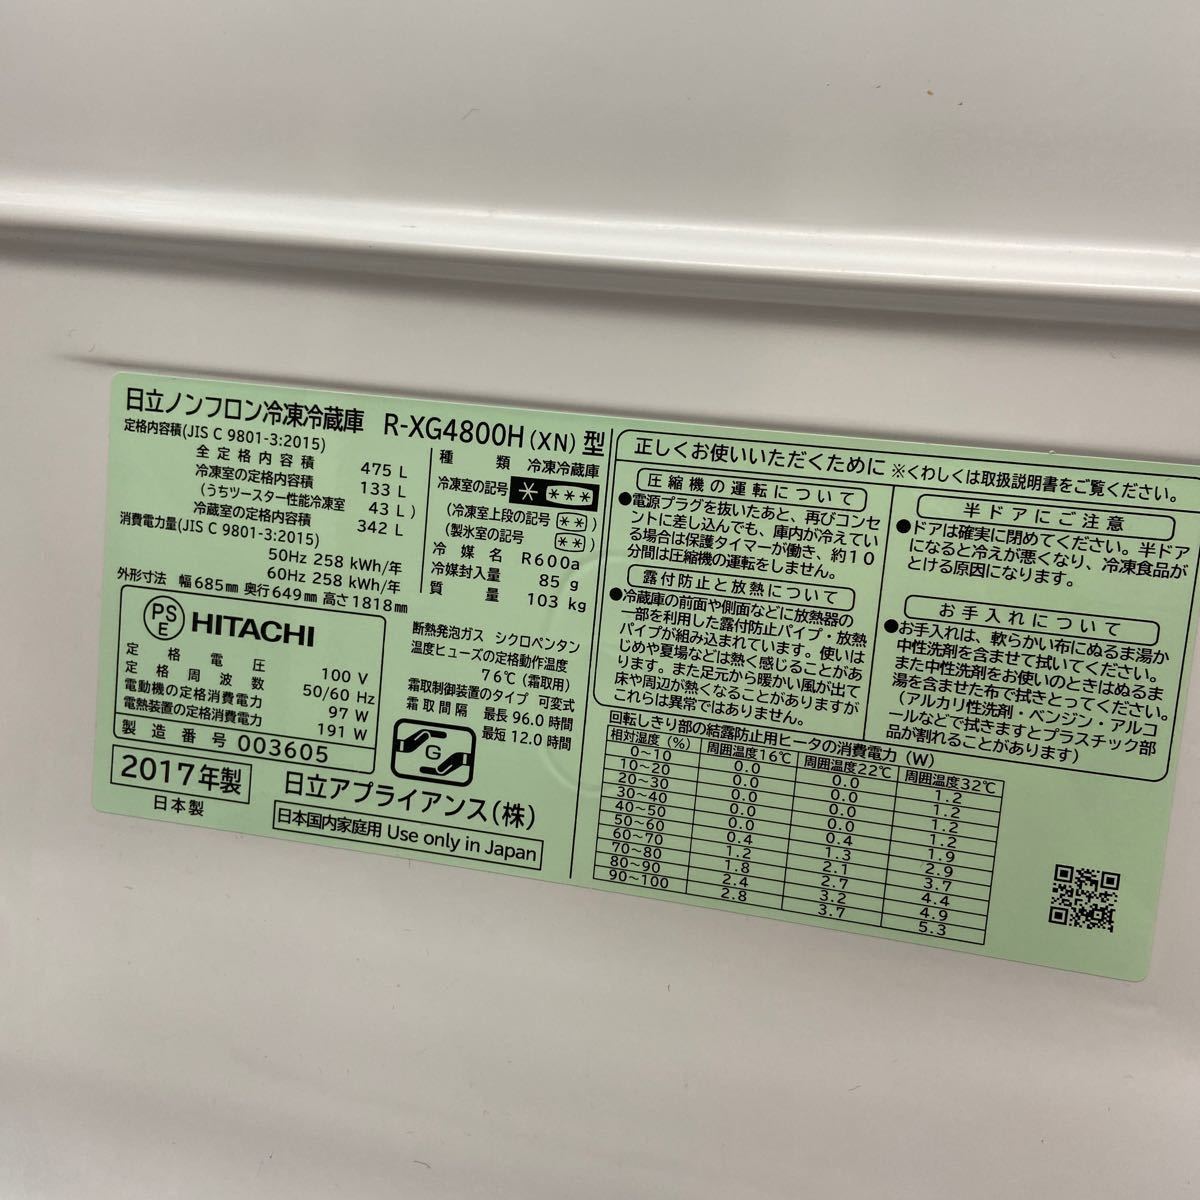 2 Sapporo departure Hitachi HITACHI non freon freezing refrigerator R-XG4800H(XN) type 2017 year made 475L 6 door operation verification settled automatic icemaker with function 